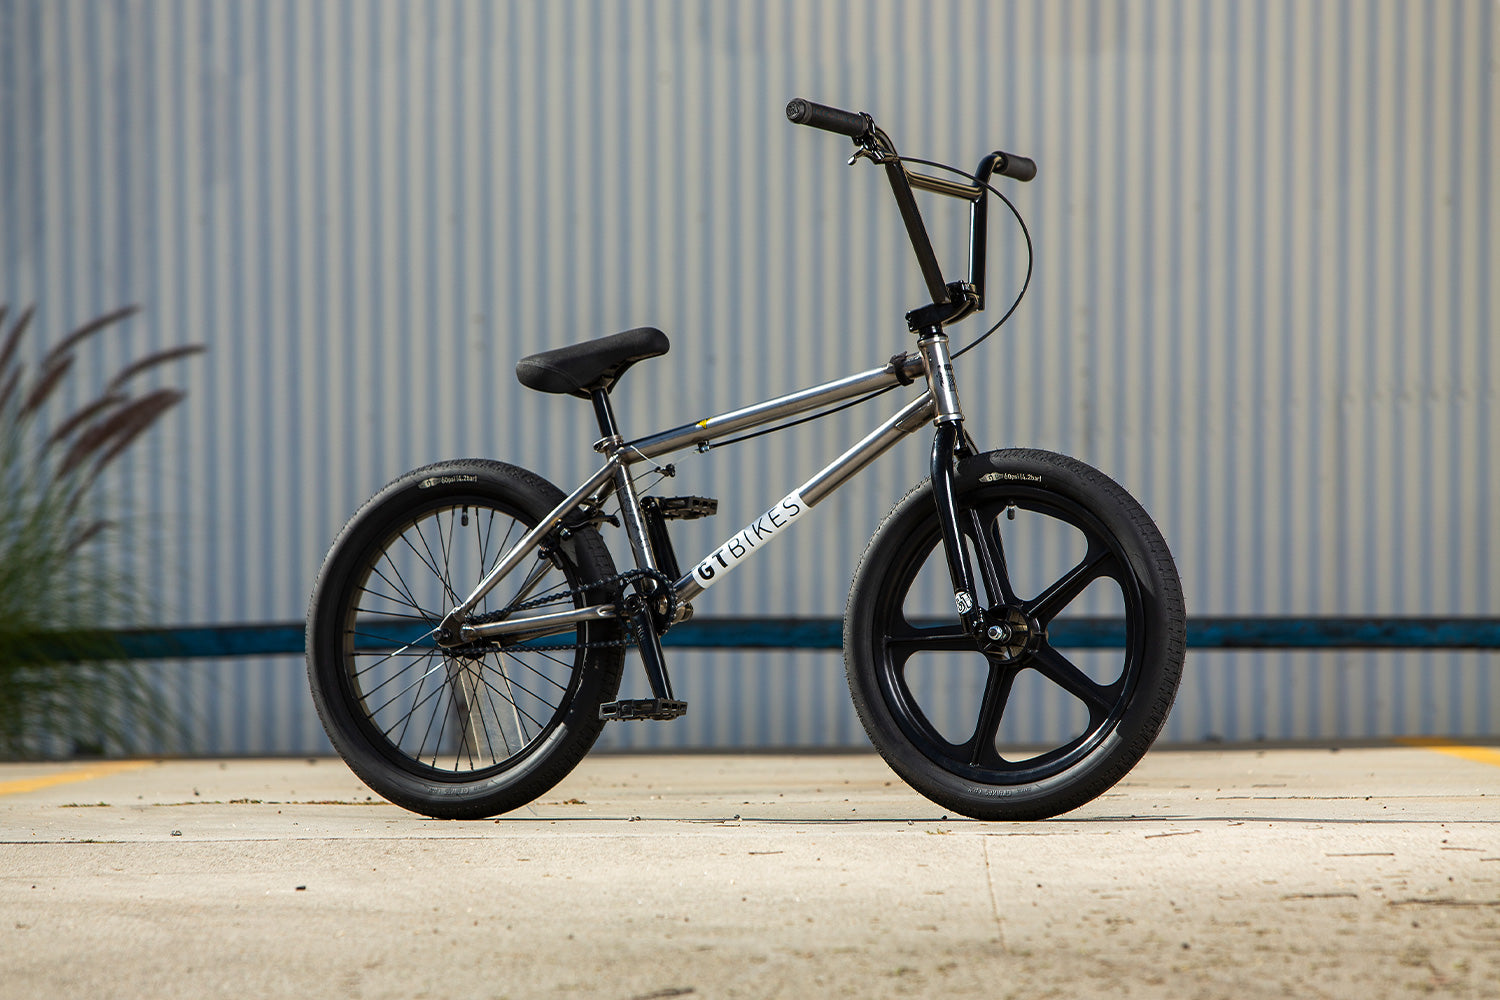 Cheap BMX Bikes and Freestyle BMX Bikes for Sale at Best Prices